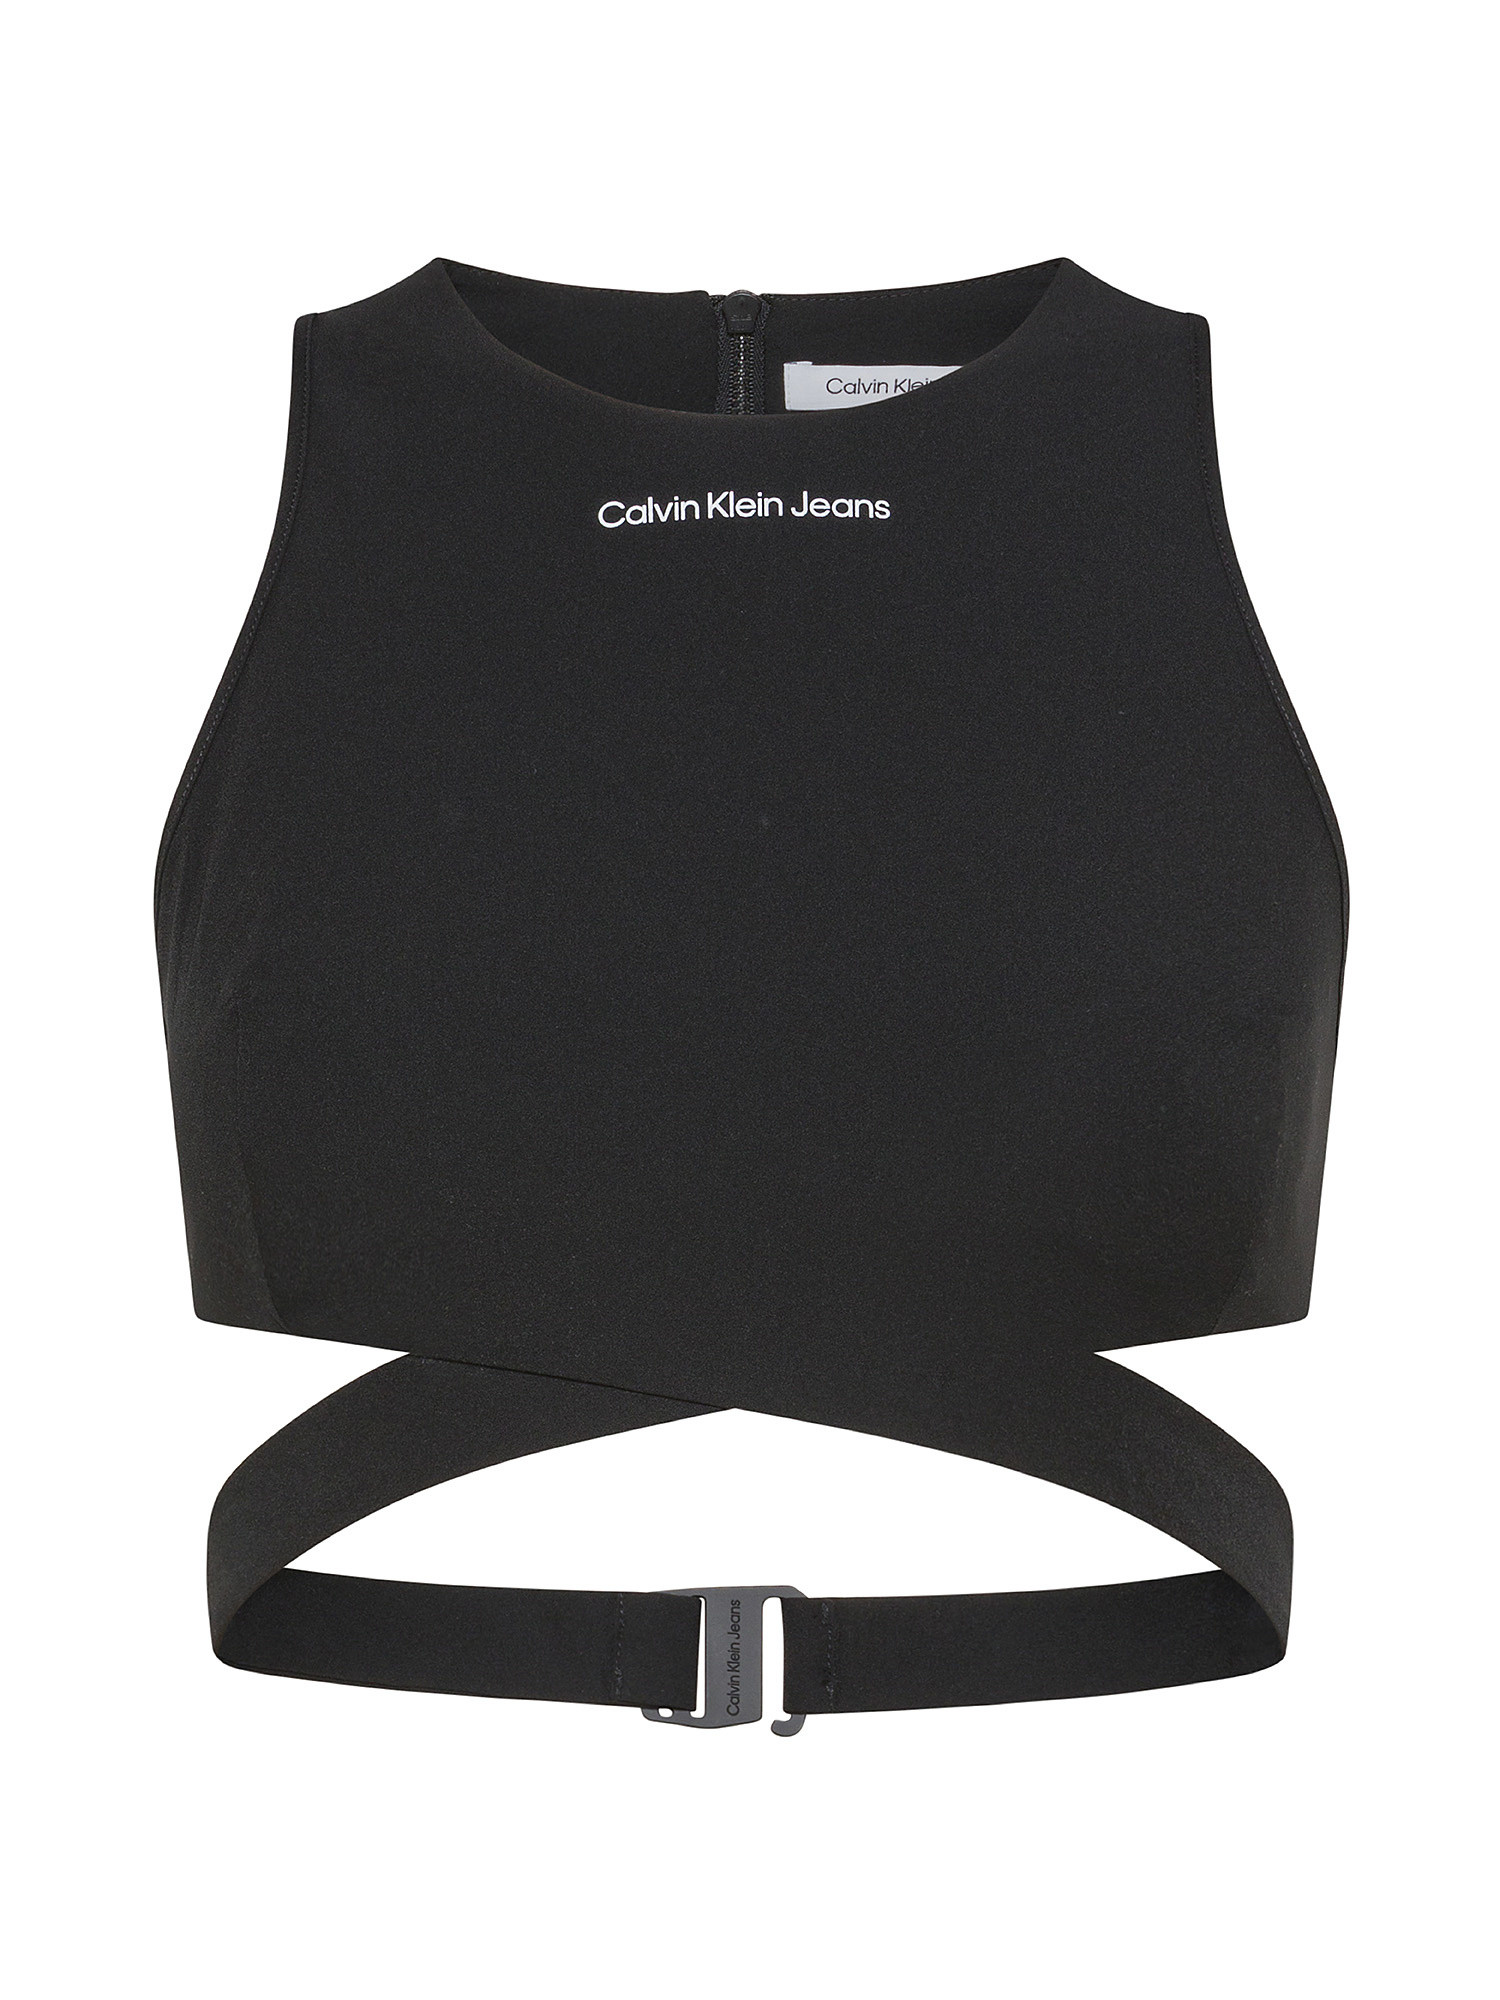 Calvin Klein Jeans - Top cut out, Nero, large image number 0